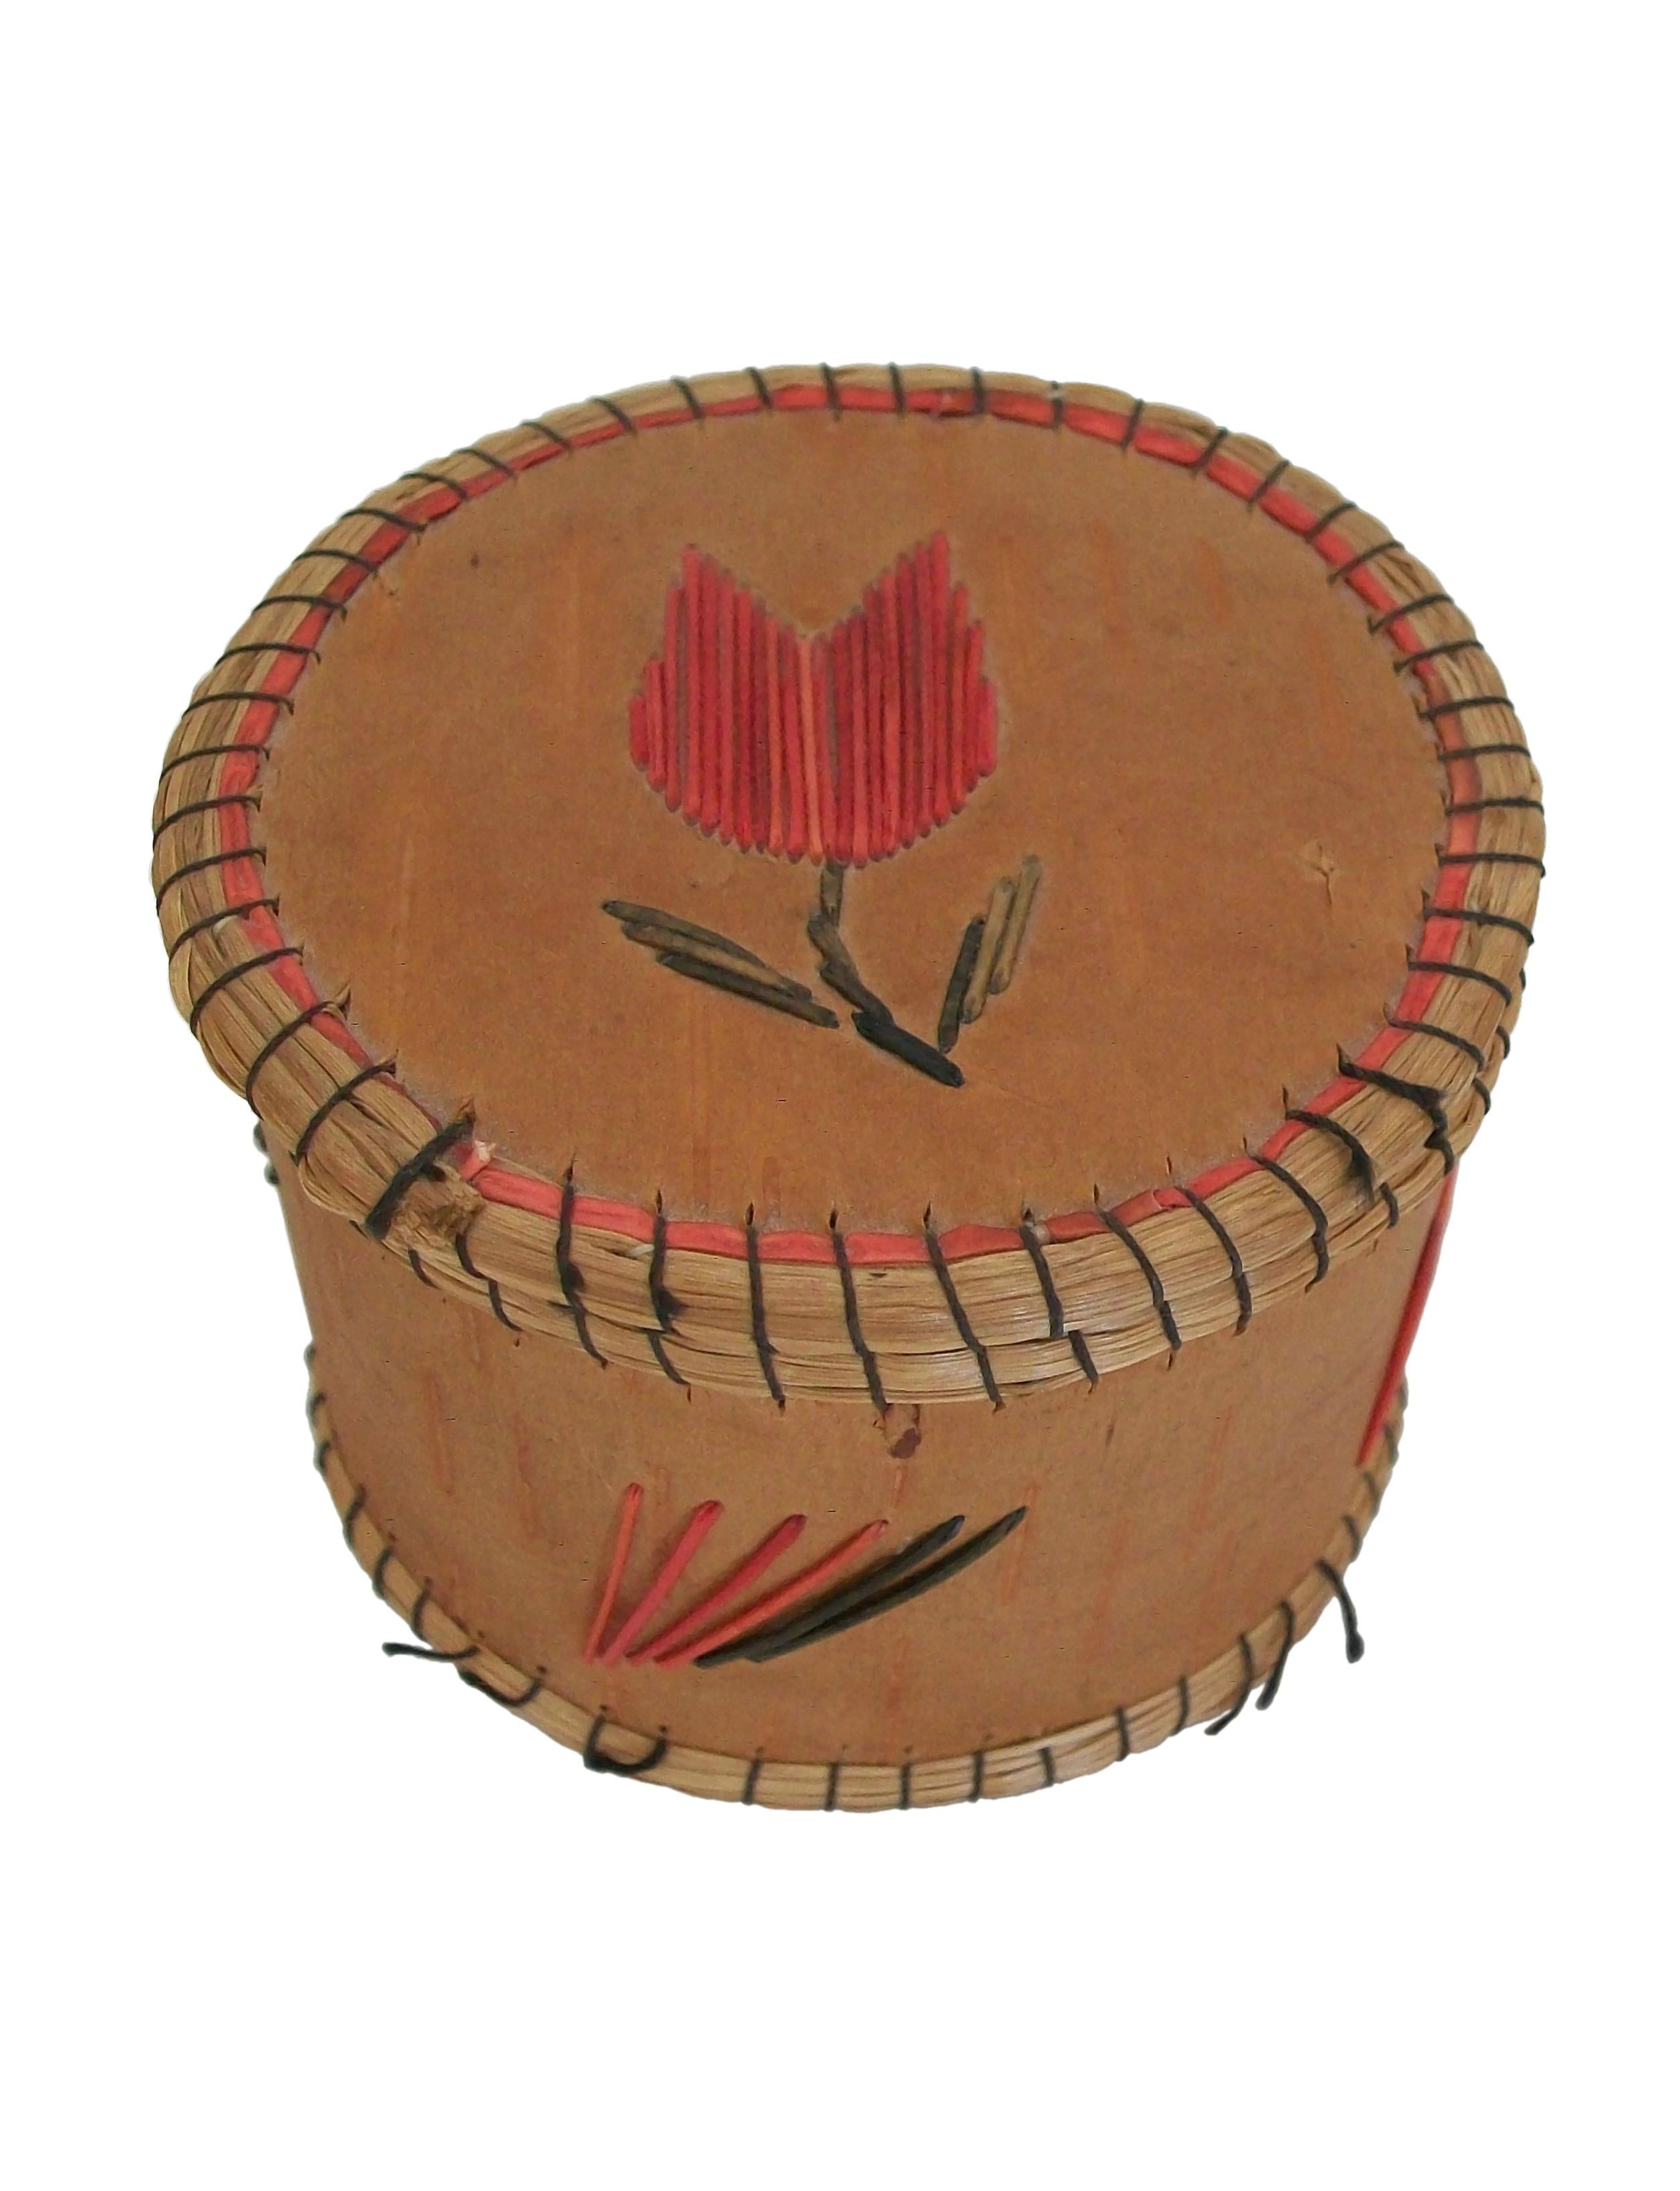 Vintage Chippewa (also known as Ojibwe) birch bark lidded box with porcupine quill decoration and sweetgrass rims fastened with black thread - featuring a finely quilled red tulip with green stem and leaves to the top and further quilled decoration